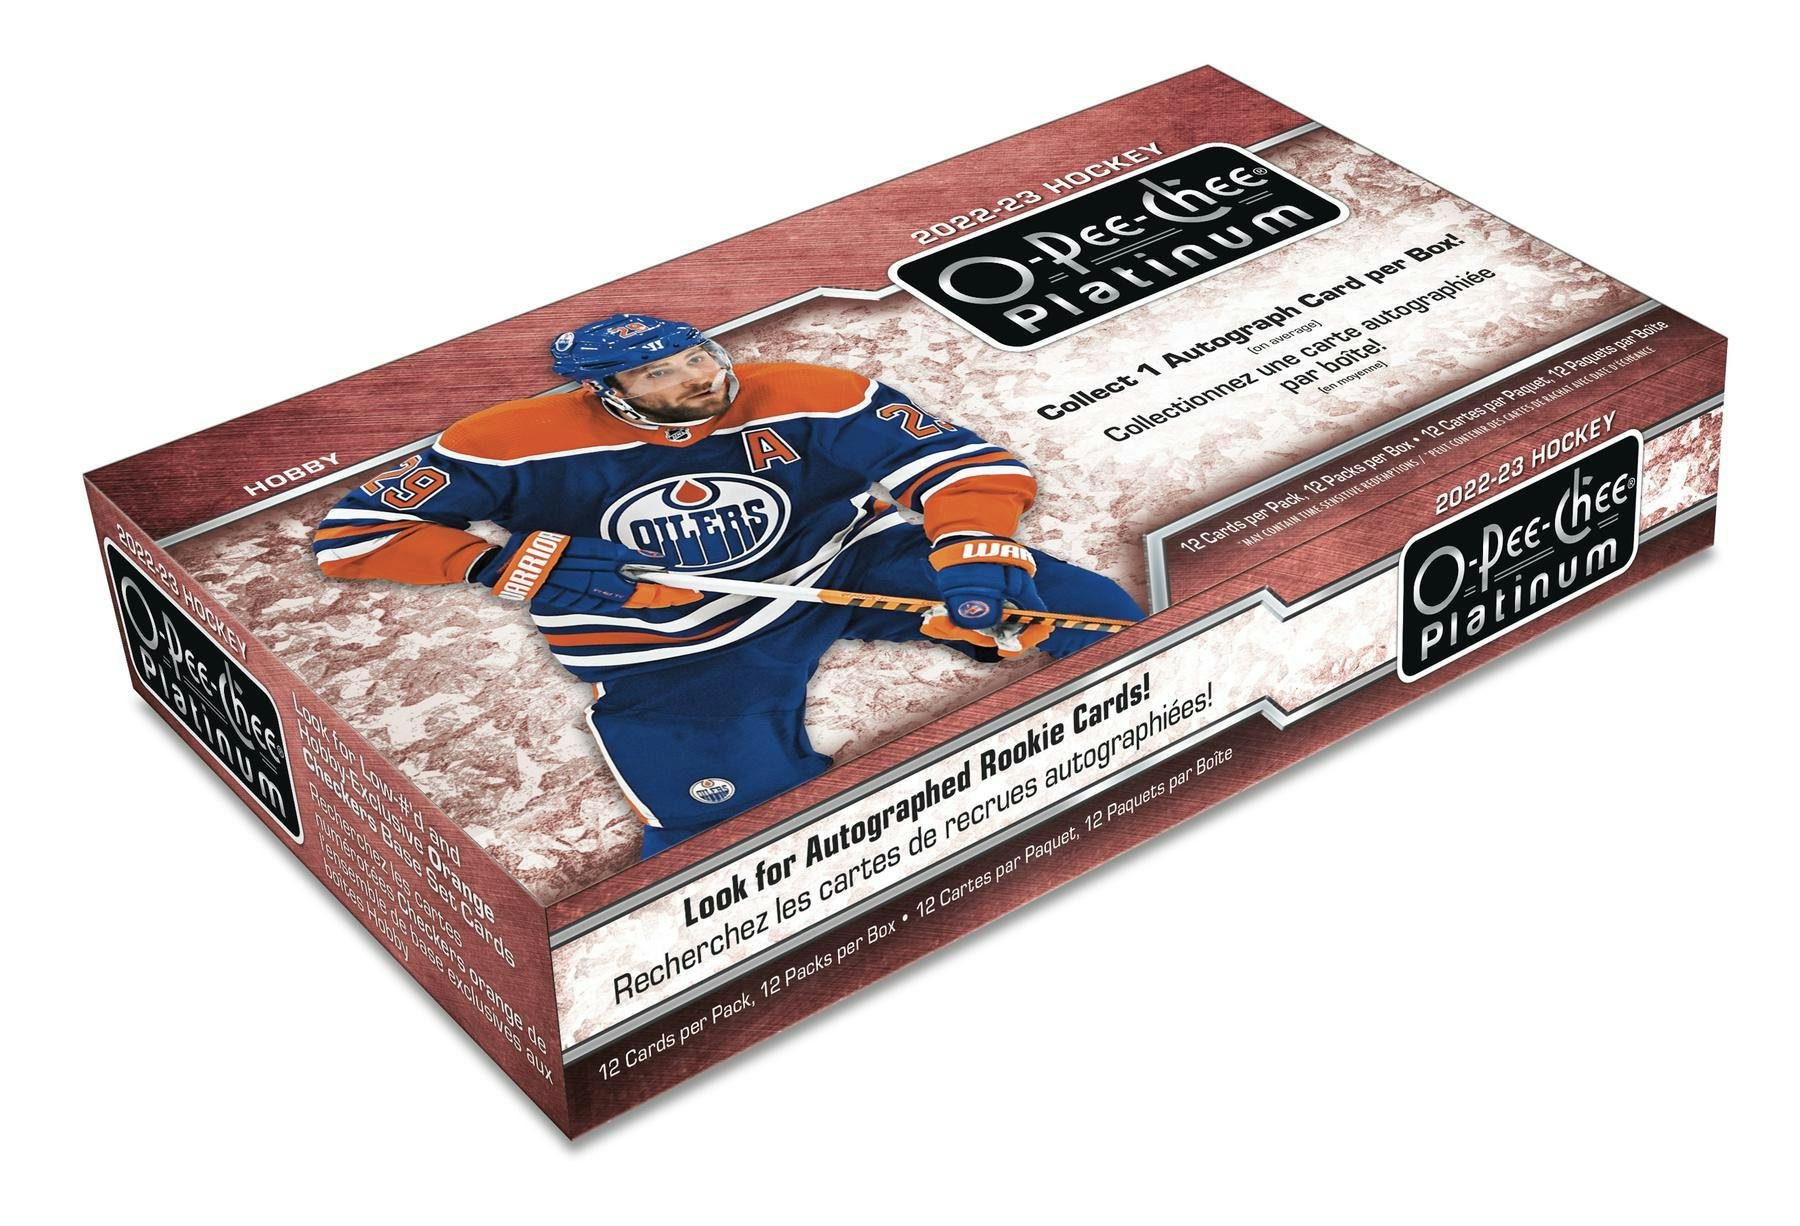 2022-23 Upper Deck O Pee Chee Platinum Hobby Box Case (Case of 8 Boxes) - Miraj Trading